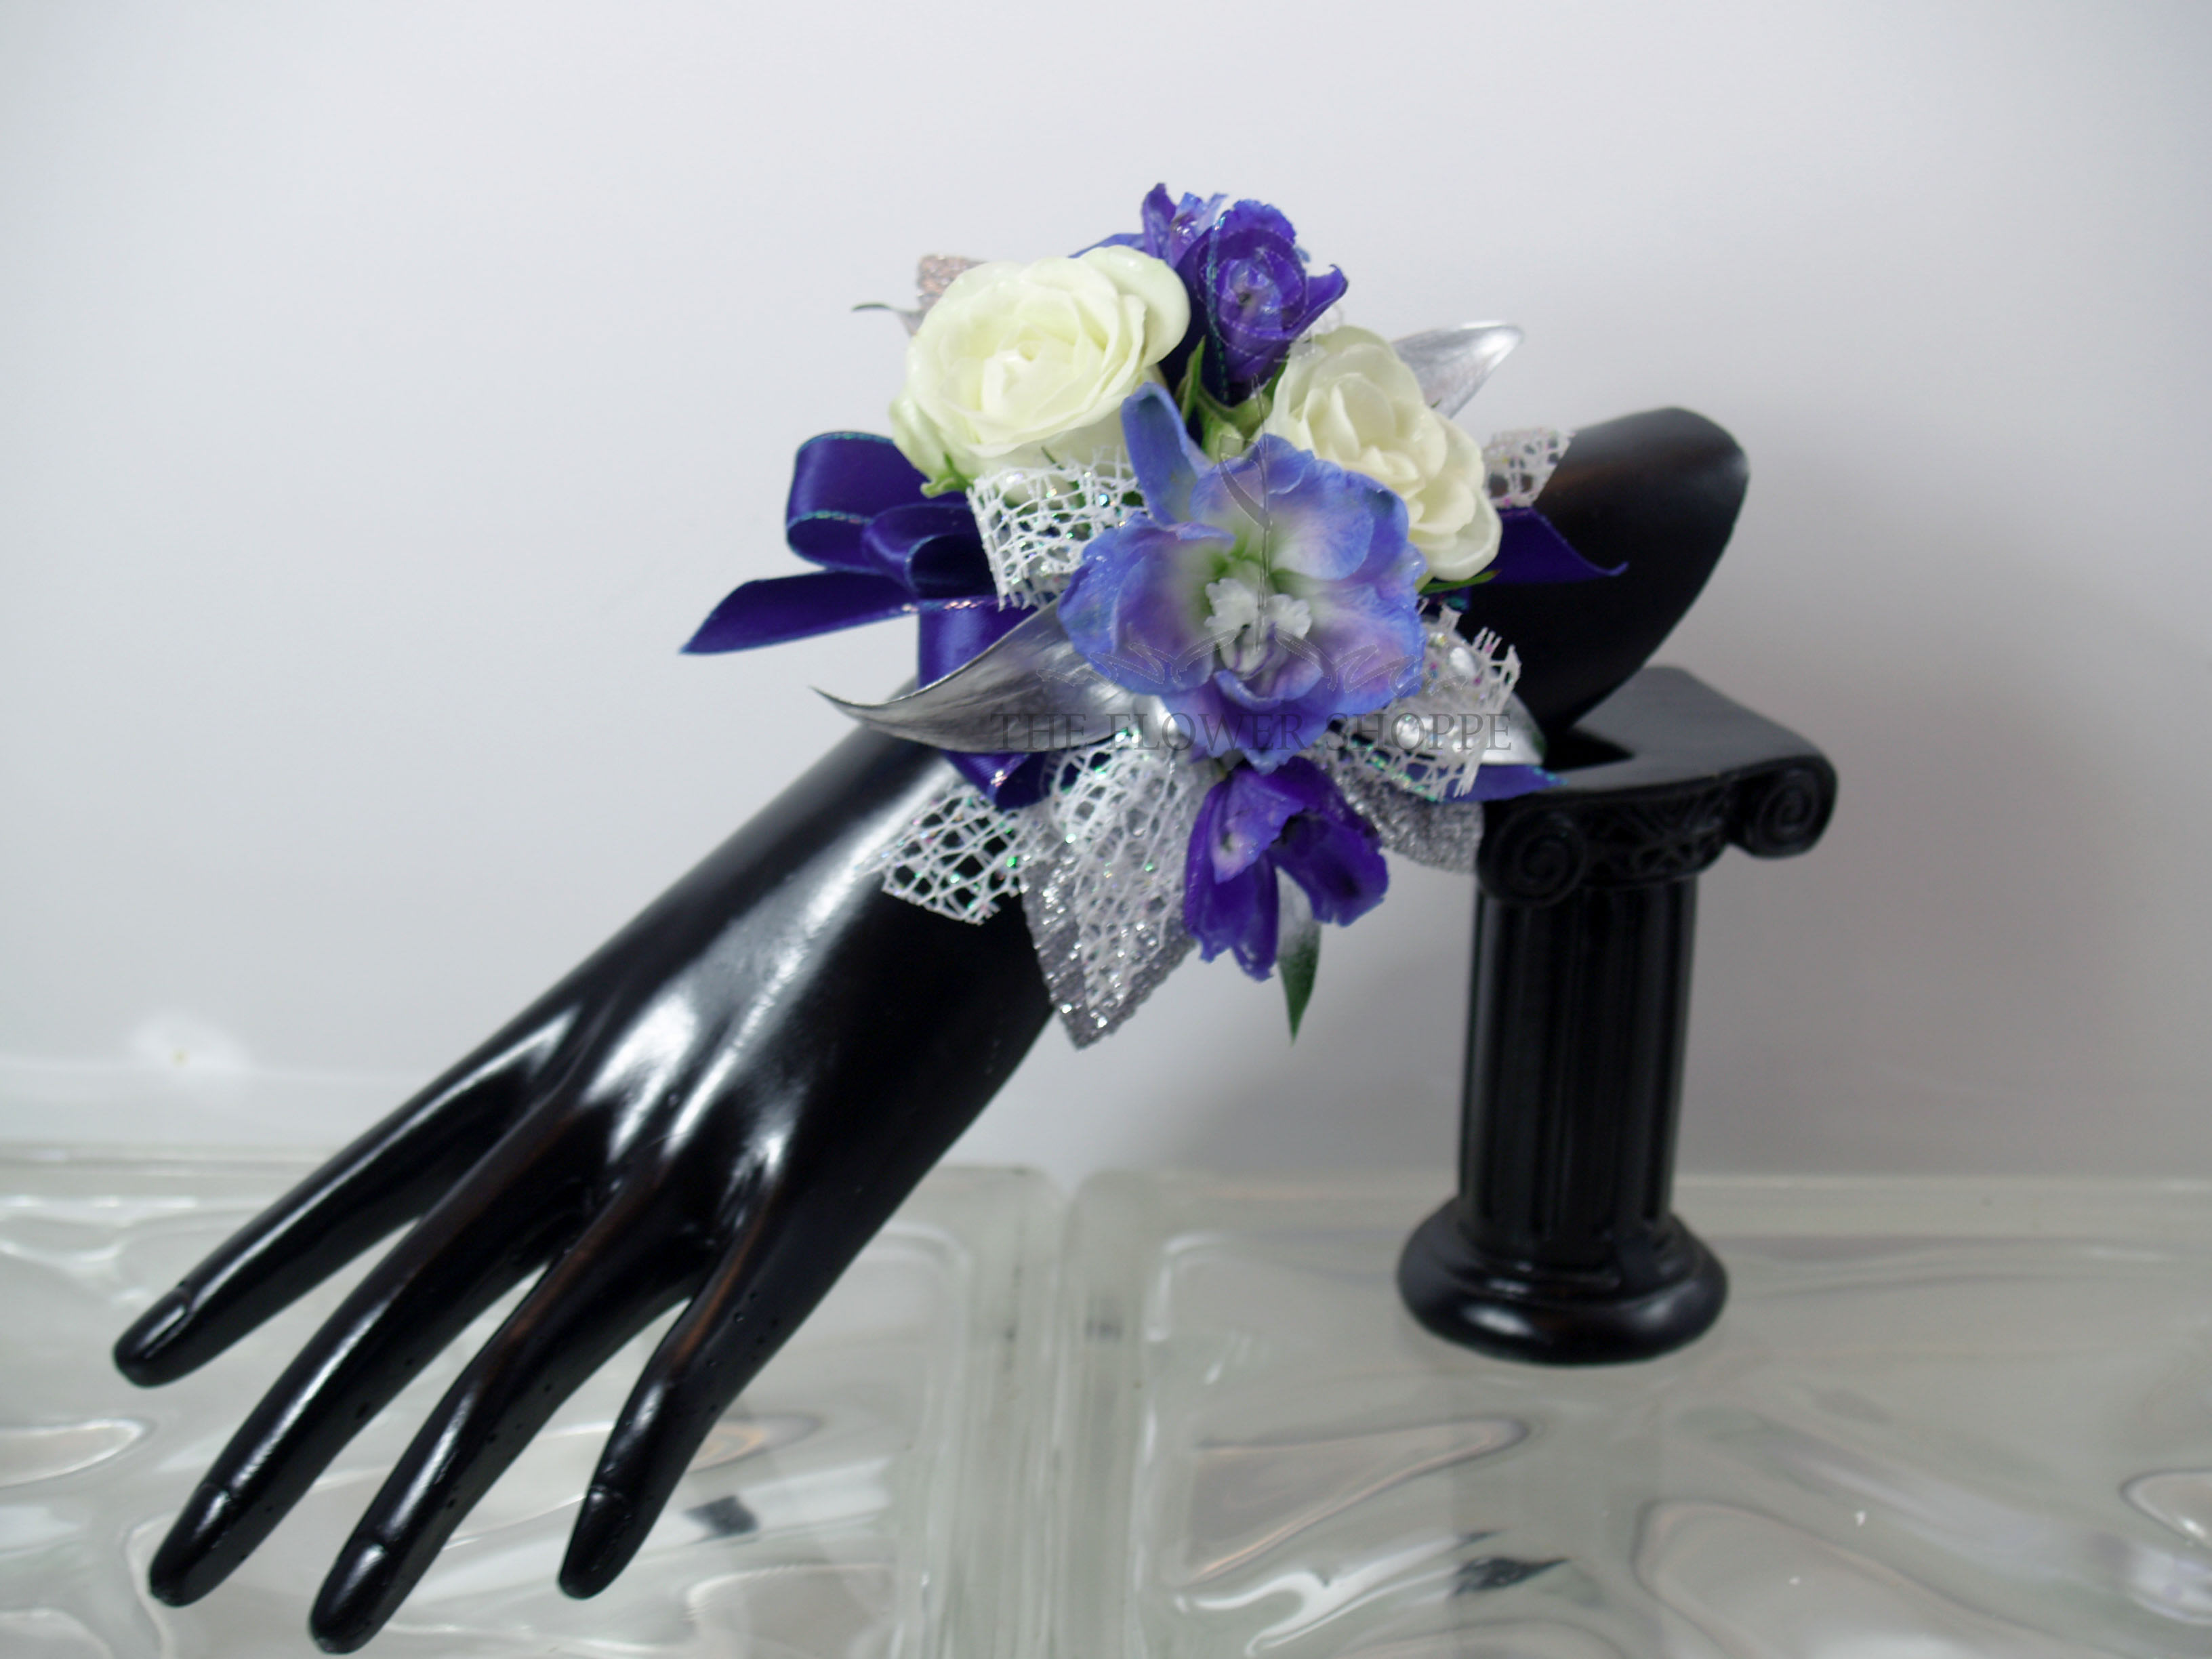 Blue &amp; White Wrist Corsage - Blue Delphinium,  White Spray Roses, And Silver Accent